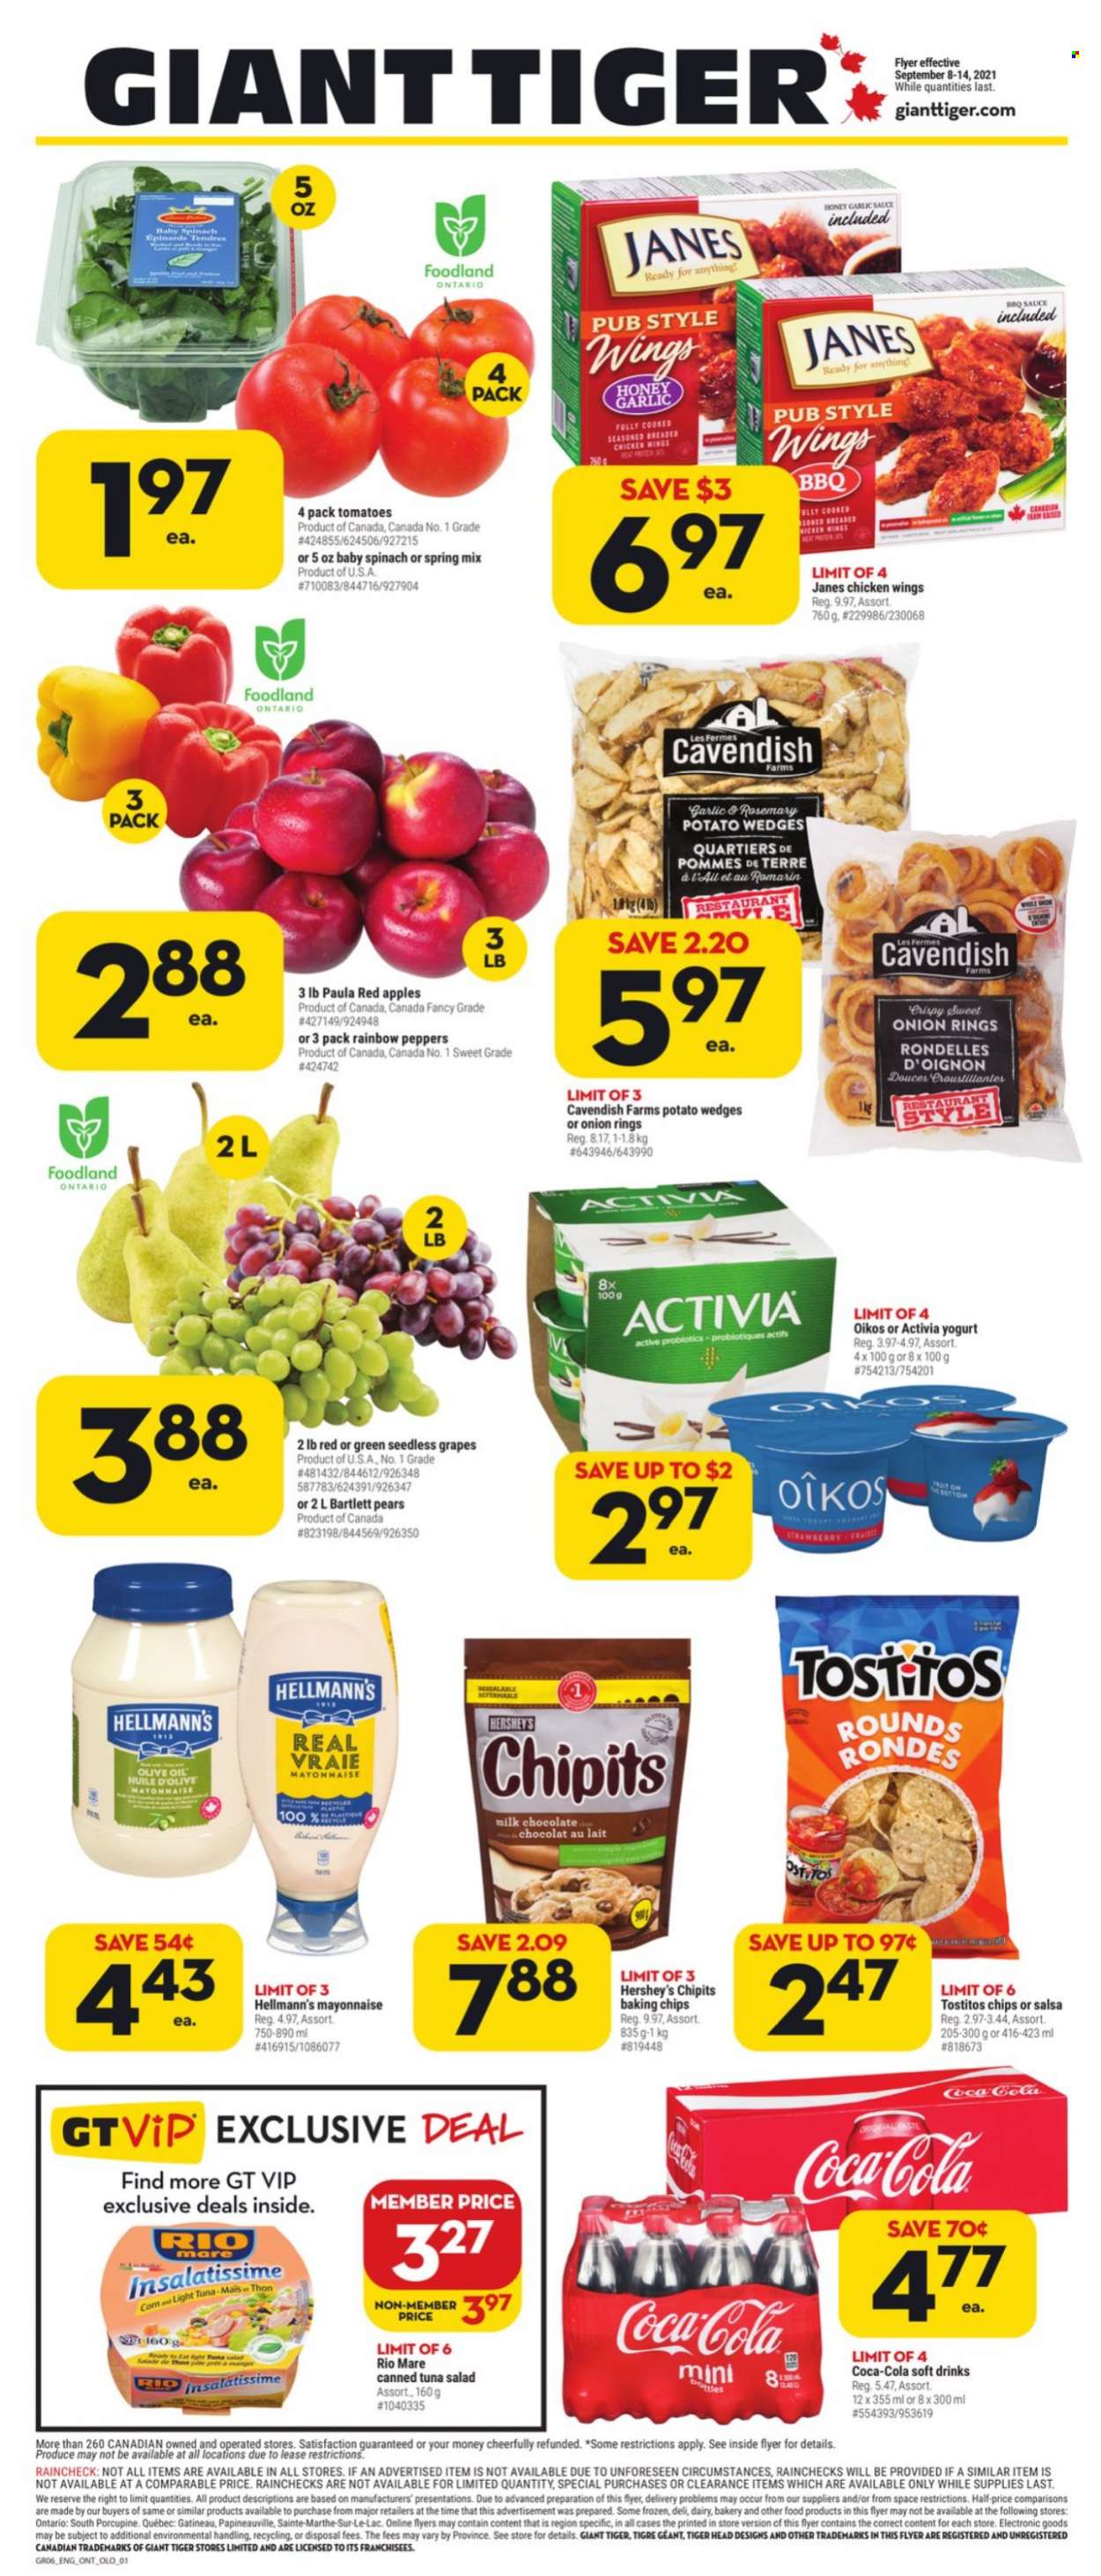 thumbnail - Giant Tiger Flyer - September 08, 2021 - September 14, 2021 - Sales products - tomatoes, salad, peppers, apples, Bartlett pears, grapes, seedless grapes, pears, tuna, onion rings, sauce, fried chicken, tuna salad, yoghurt, Activia, Oikos, mayonnaise, Hellmann’s, Hershey's, potato wedges, milk chocolate, chocolate, Tostitos, baking chips, canned tuna, light tuna, BBQ sauce, salsa, garlic sauce, olive oil, oil, honey, Coca-Cola, soft drink. Page 1.